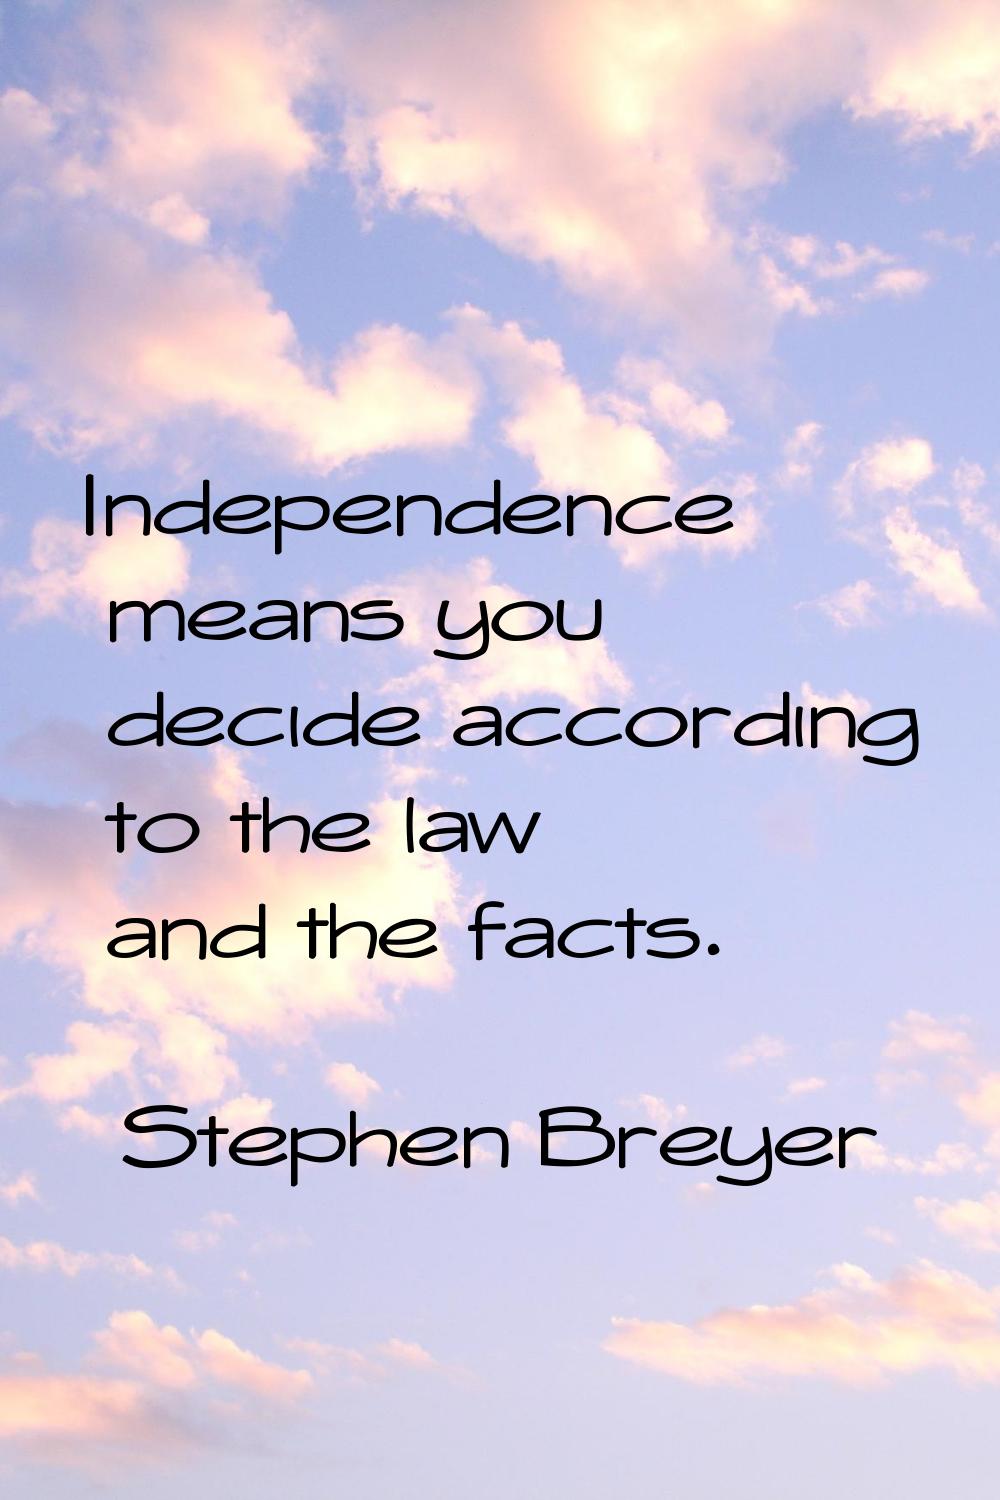 Independence means you decide according to the law and the facts.